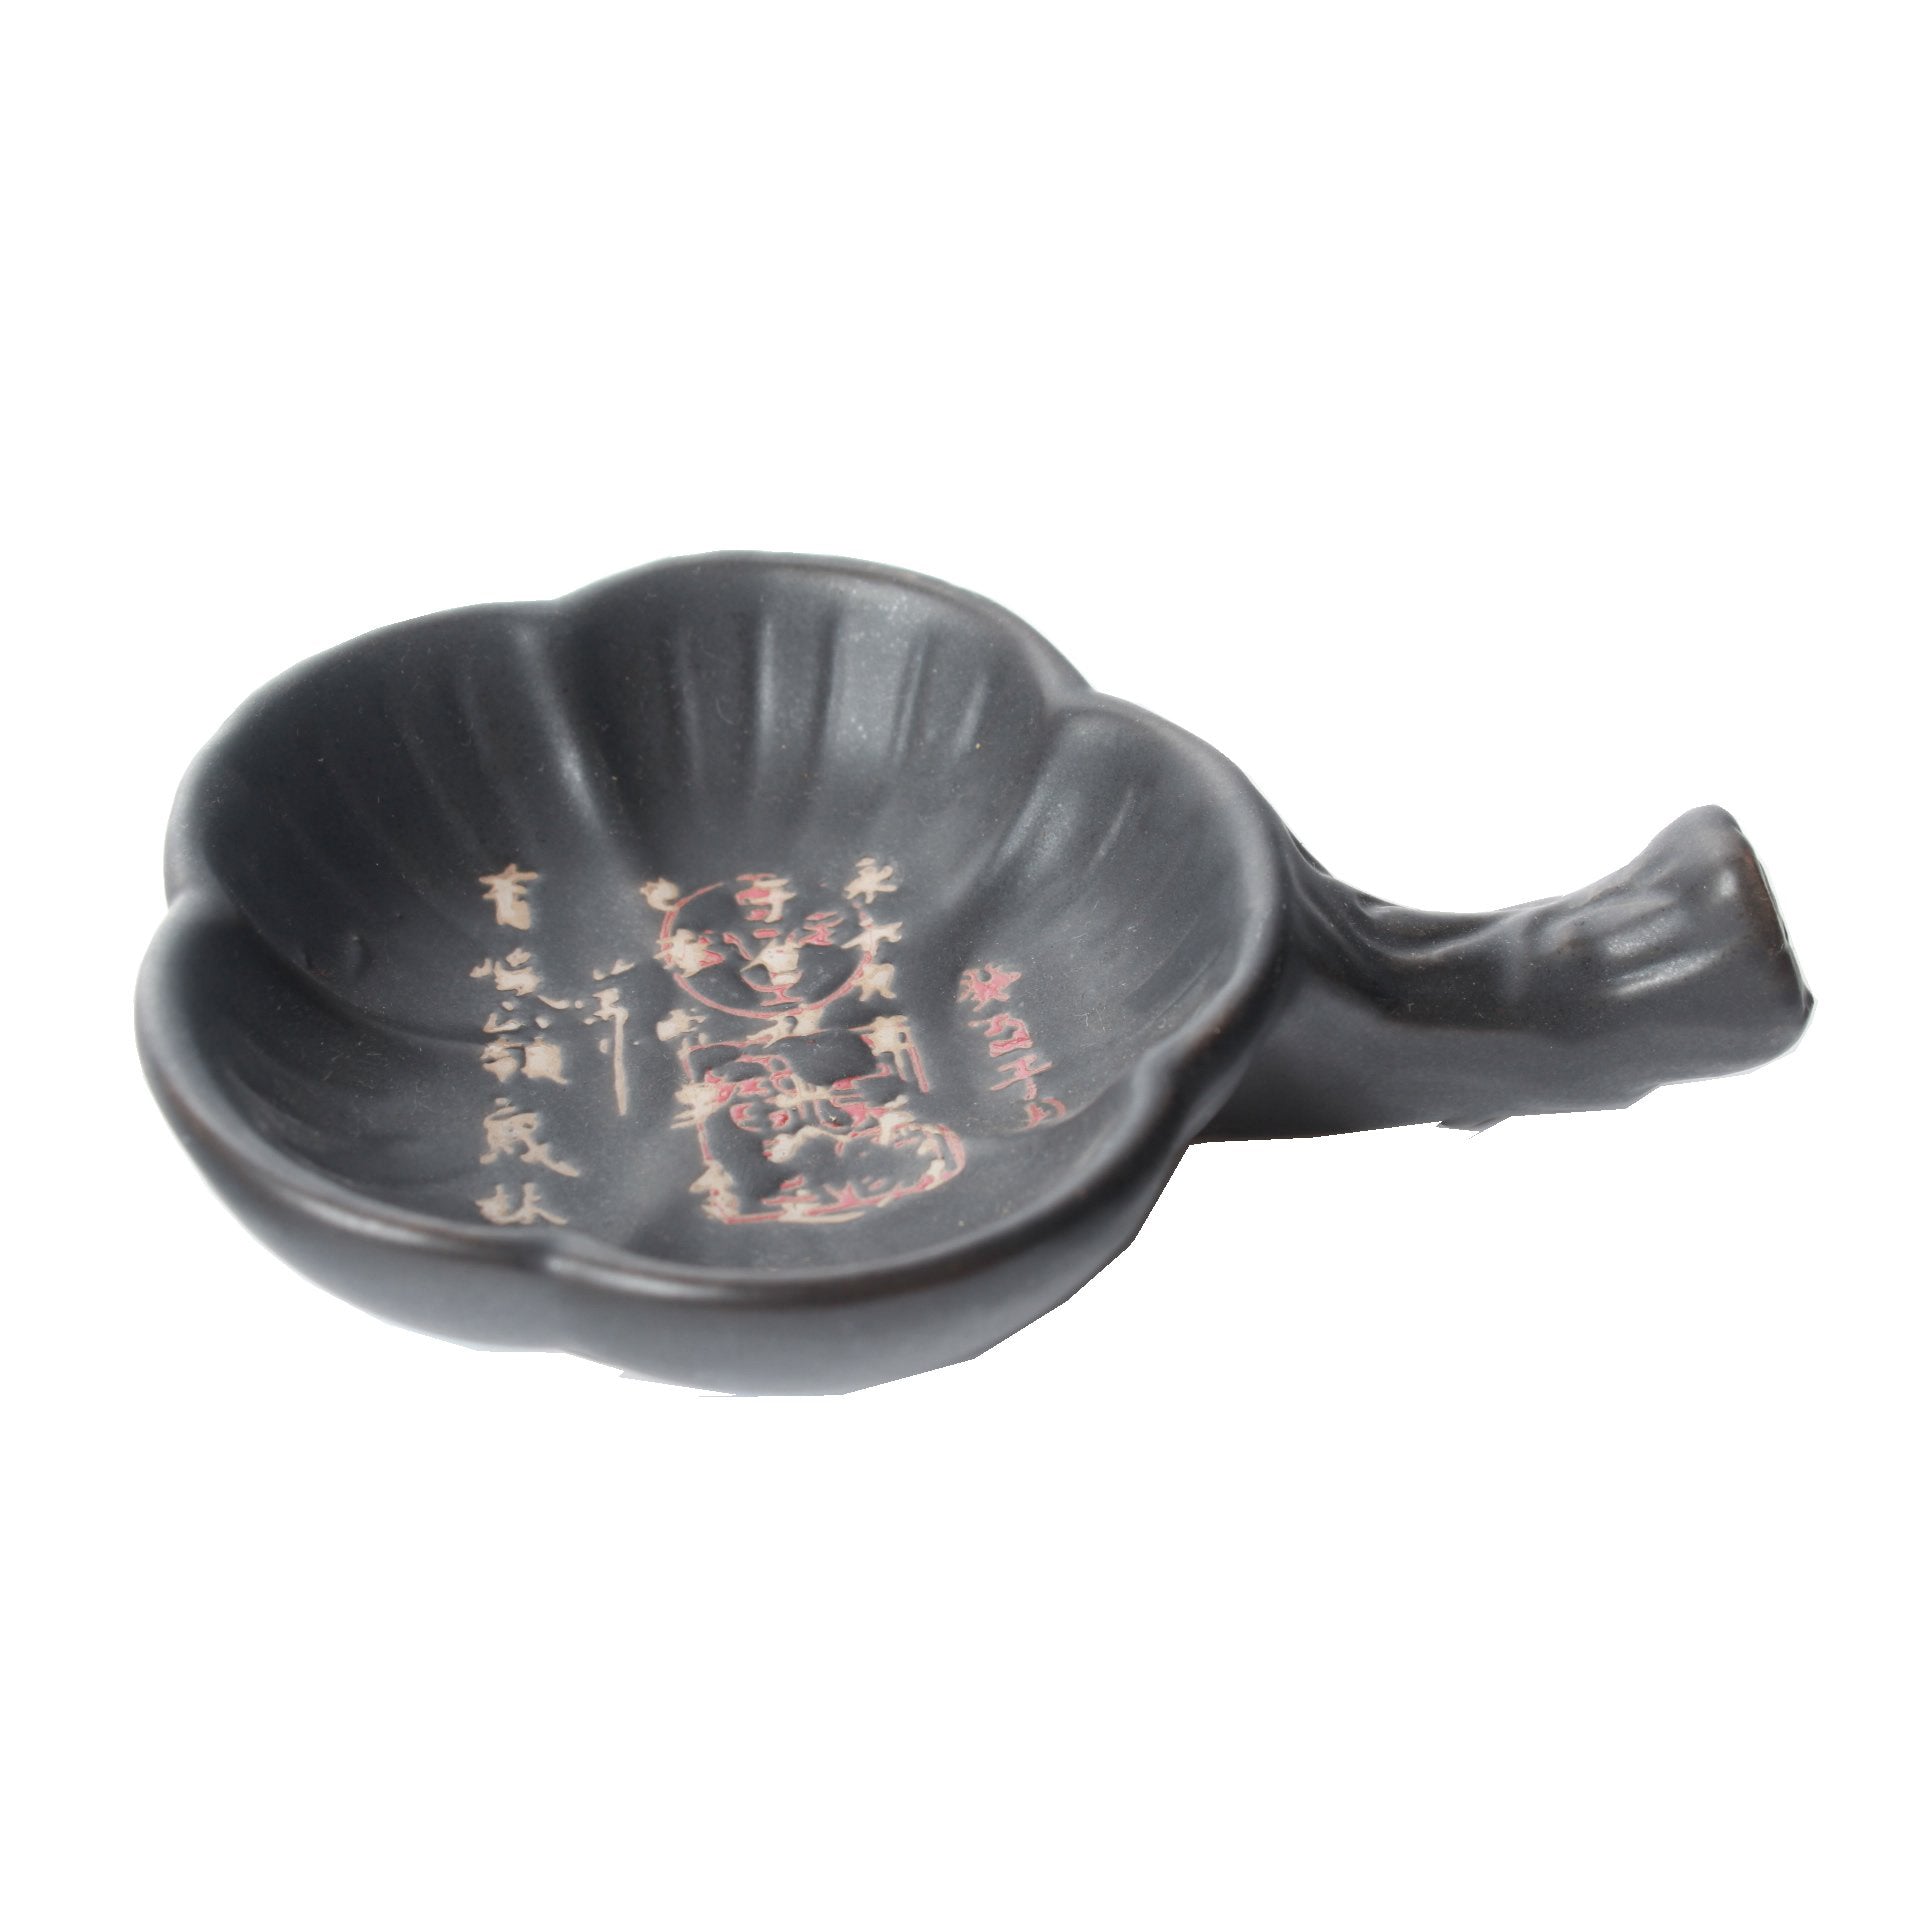 Simple designed Chinese traditional ink well & brush rest with a hand carved poetry on.